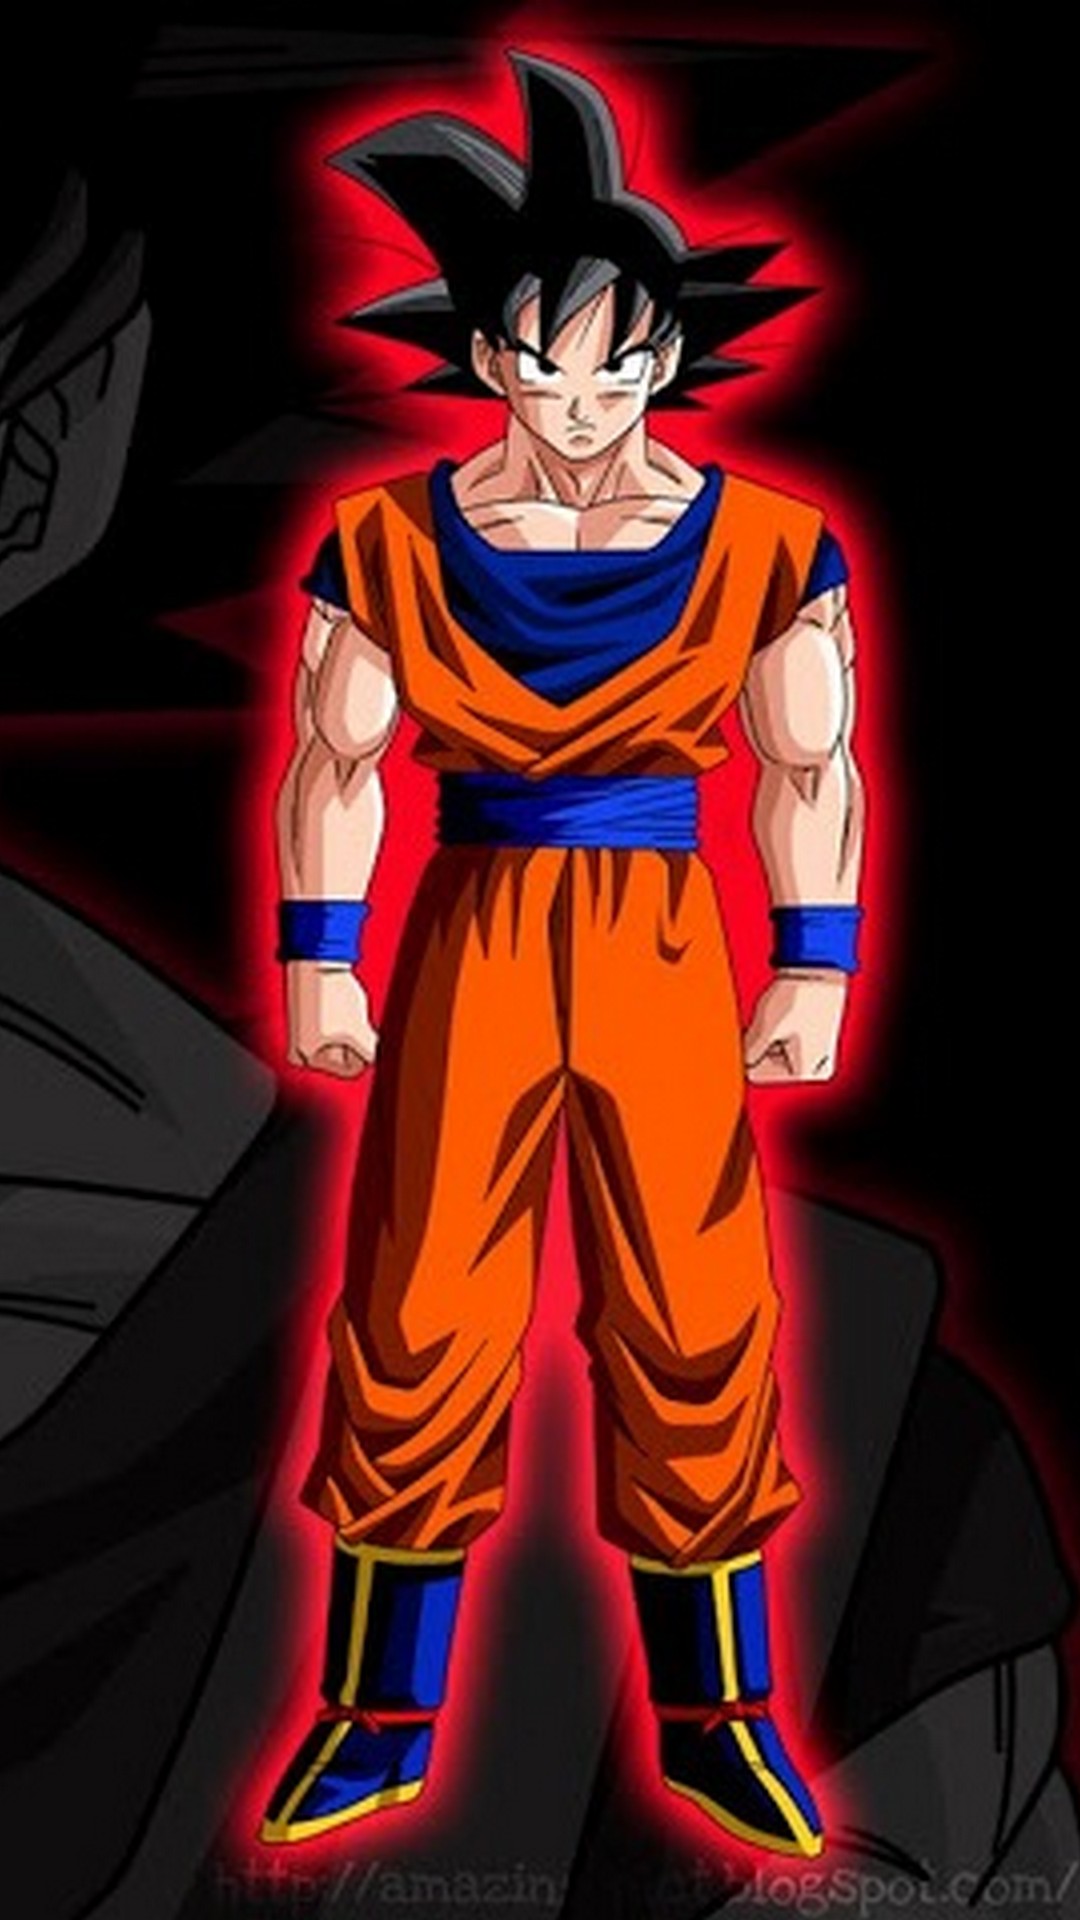 Android Wallpaper Goku Imagenes with HD resolution 1080x1920